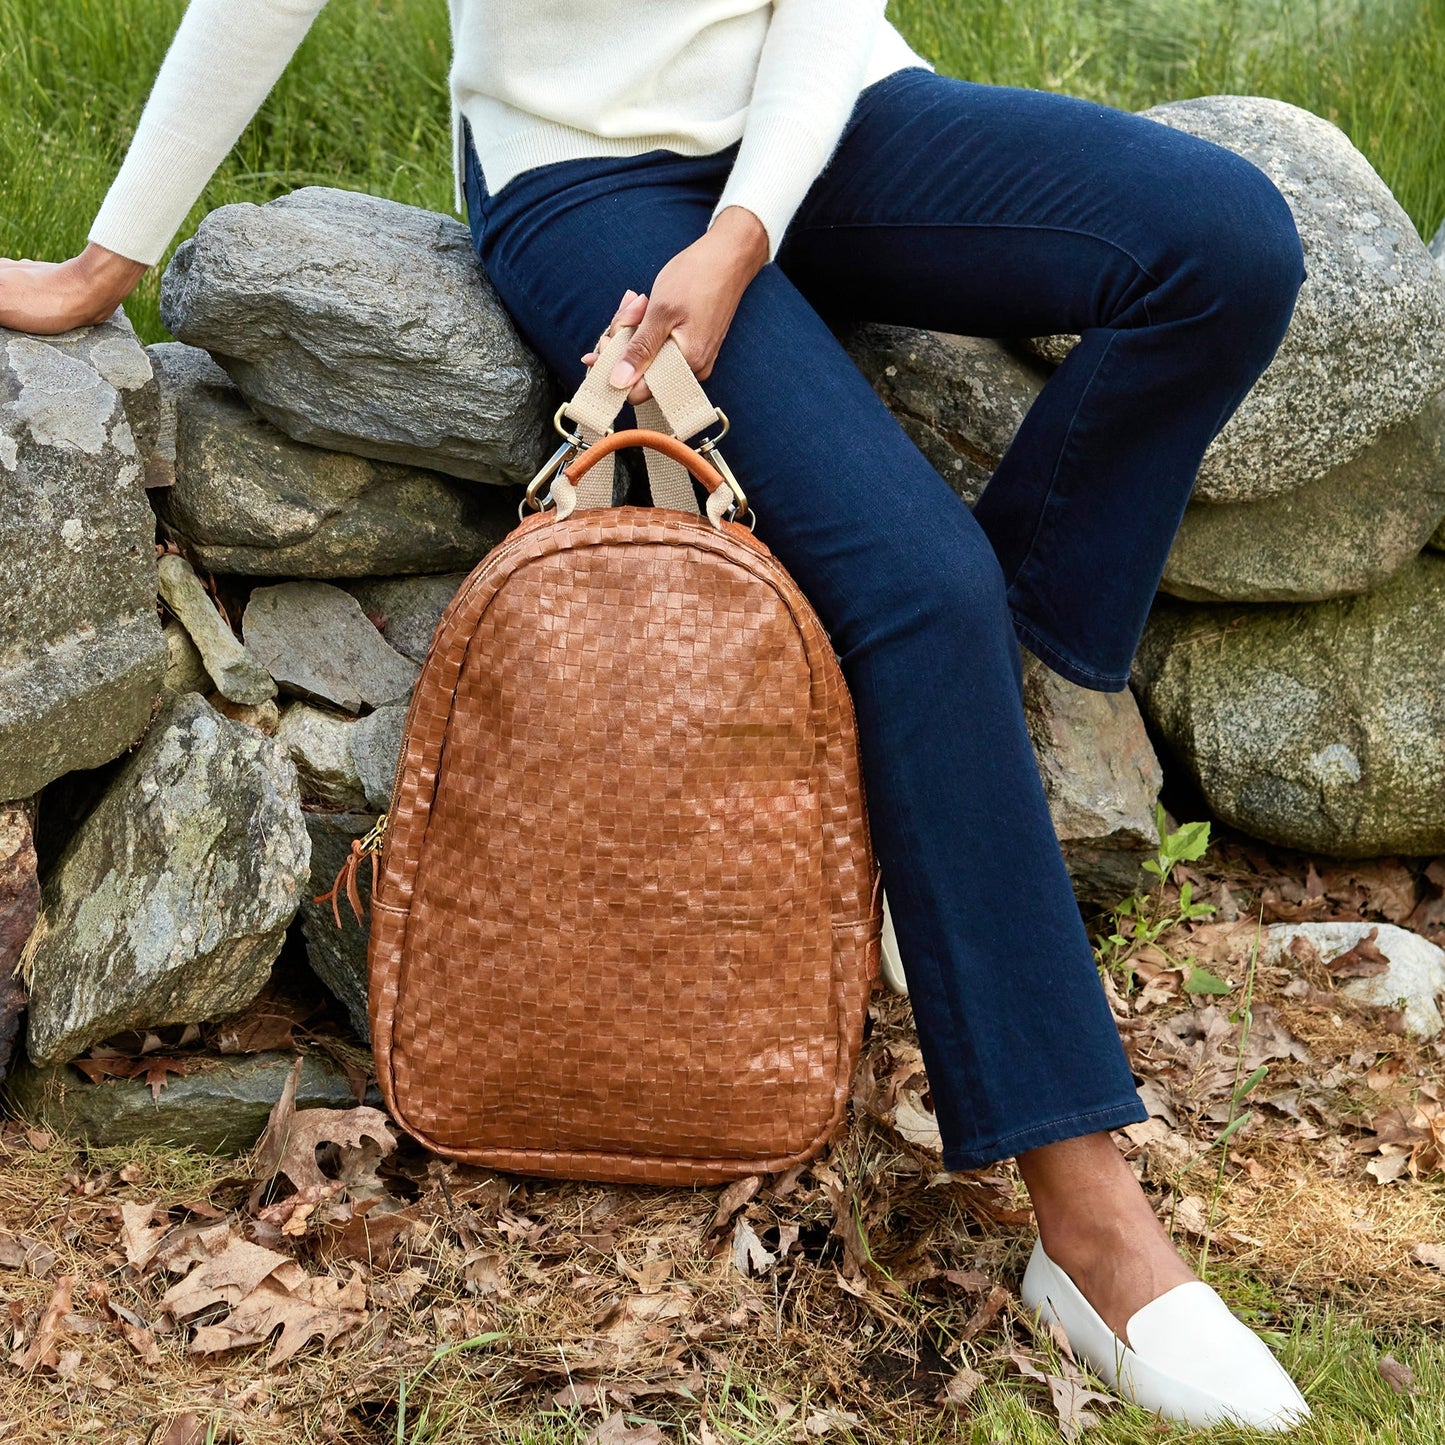 A woman is shown sitting on a stone wall, wearing jeans and a cream jumper. In her right hand she is holding a tan coloured washable paper woven backpack by its shoulder straps.